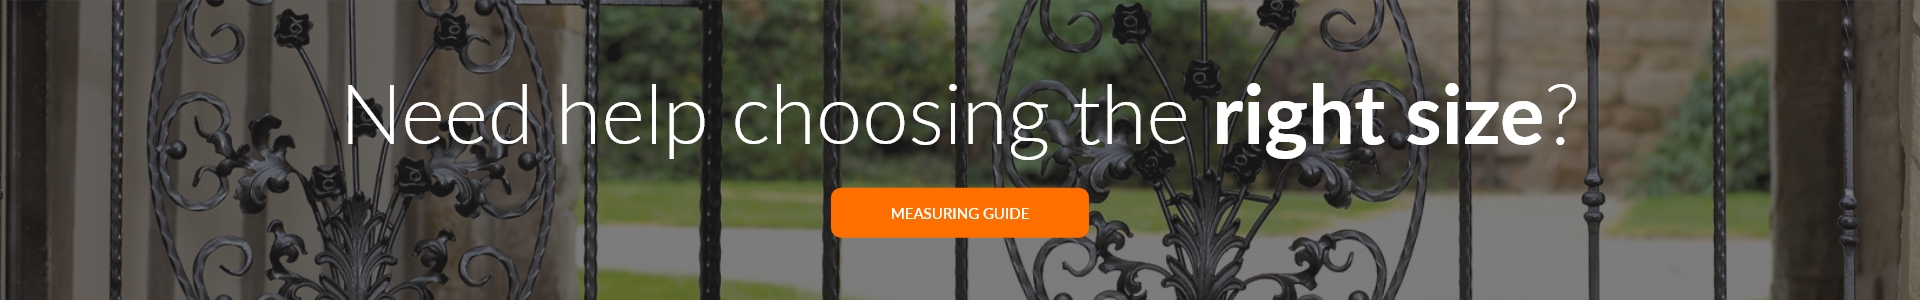 View the measuring guide if you need help choosing the right size